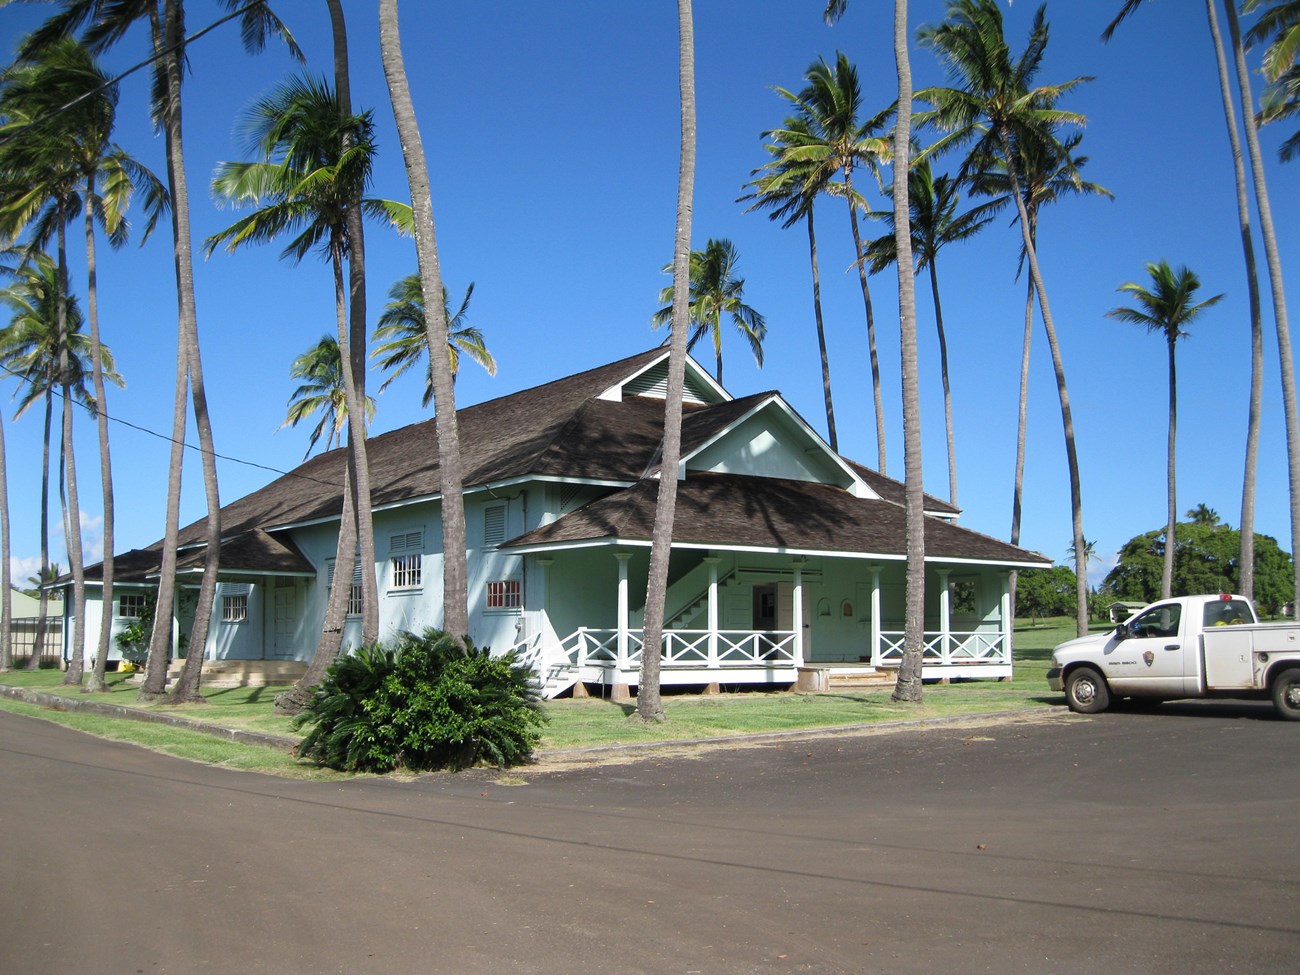 A rectangular community building with a porch, surrounded by palm trees